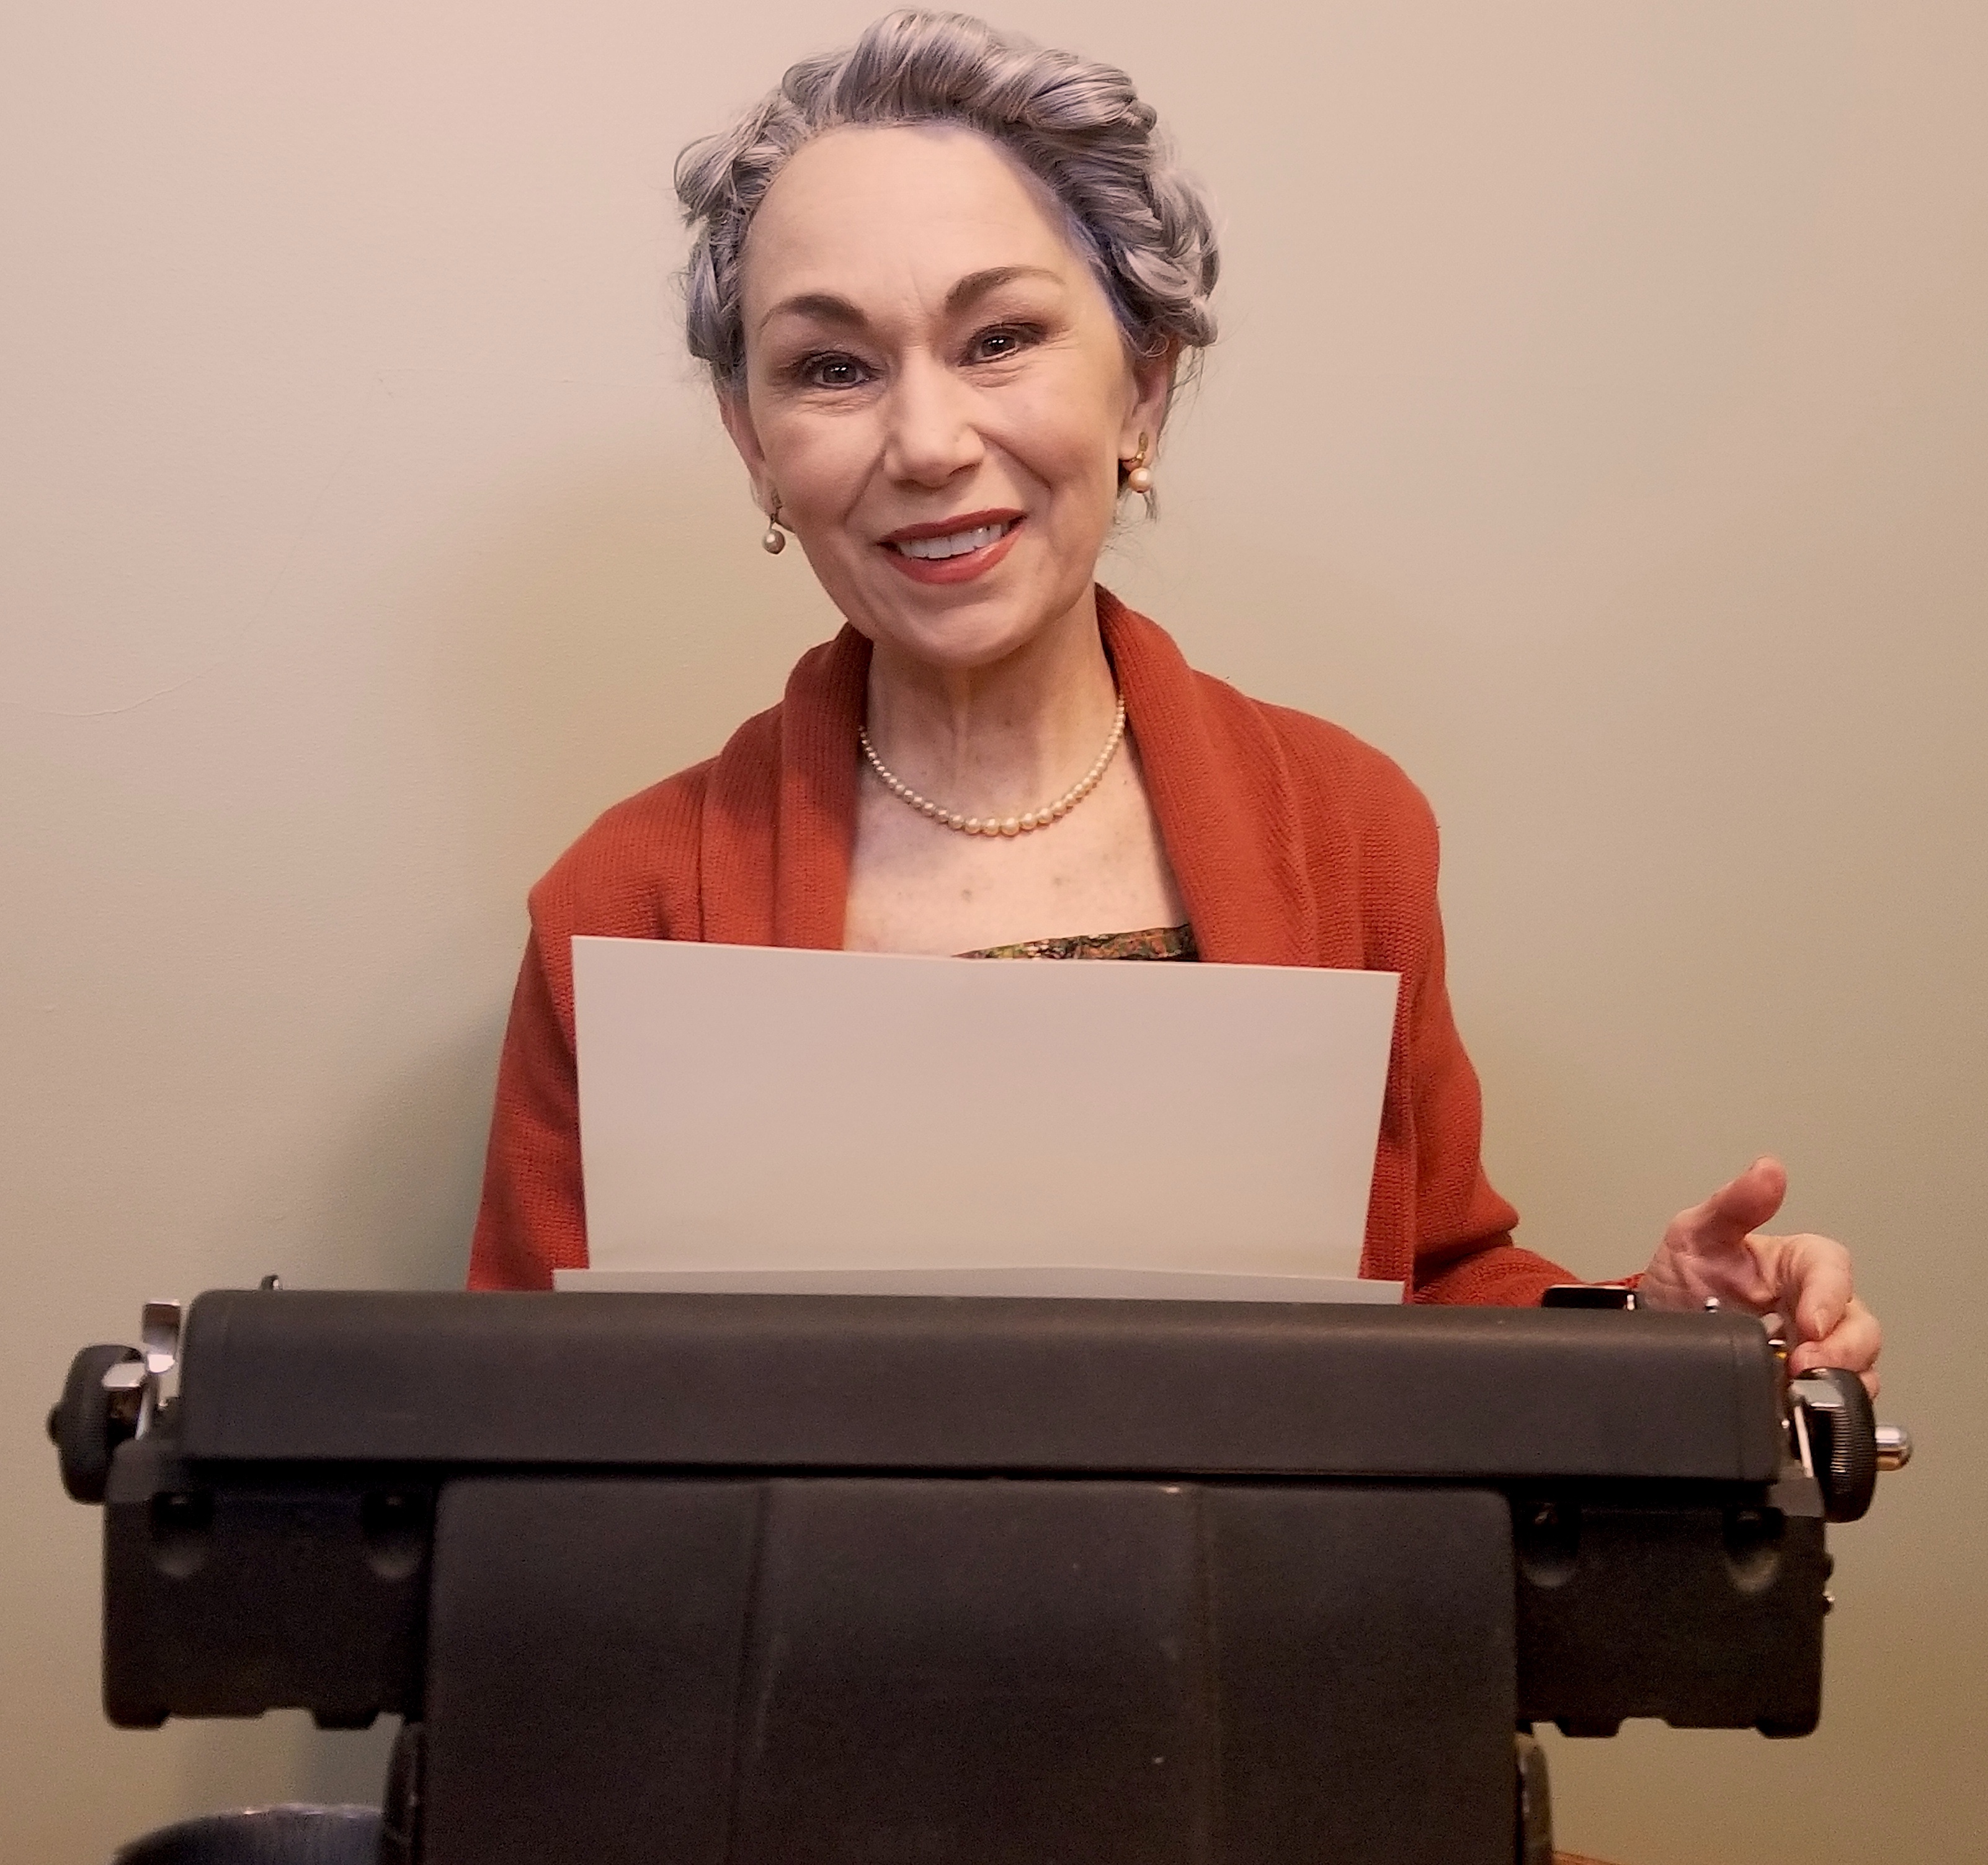 Debra Miller portraying Agatha Christie, seated in front of a typewriter